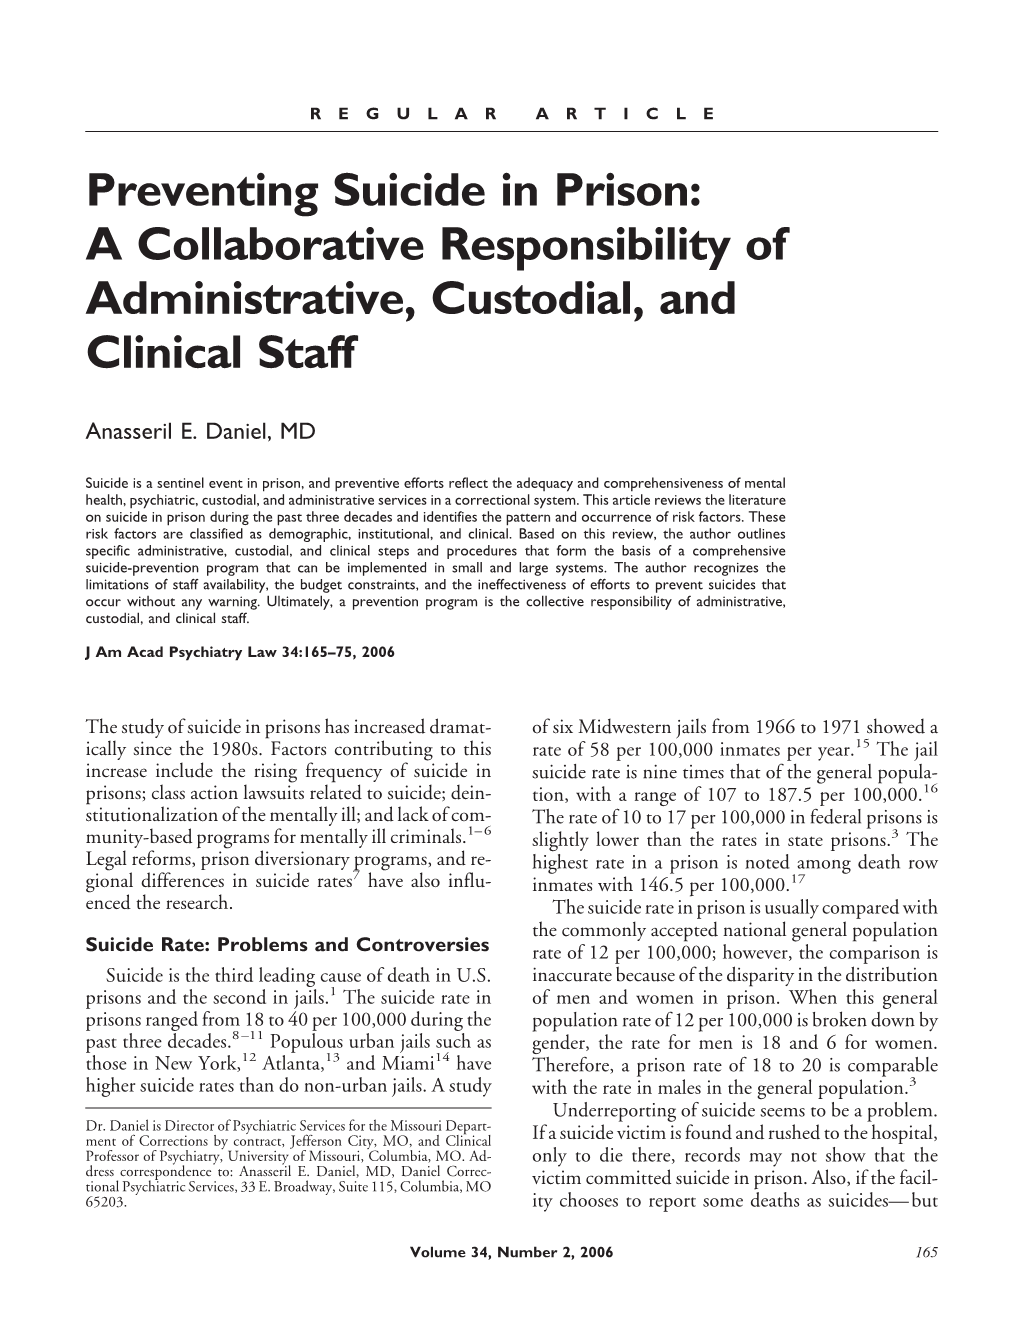 Preventing Suicide in Prison: a Collaborative Responsibility of Administrative, Custodial, and Clinical Staff